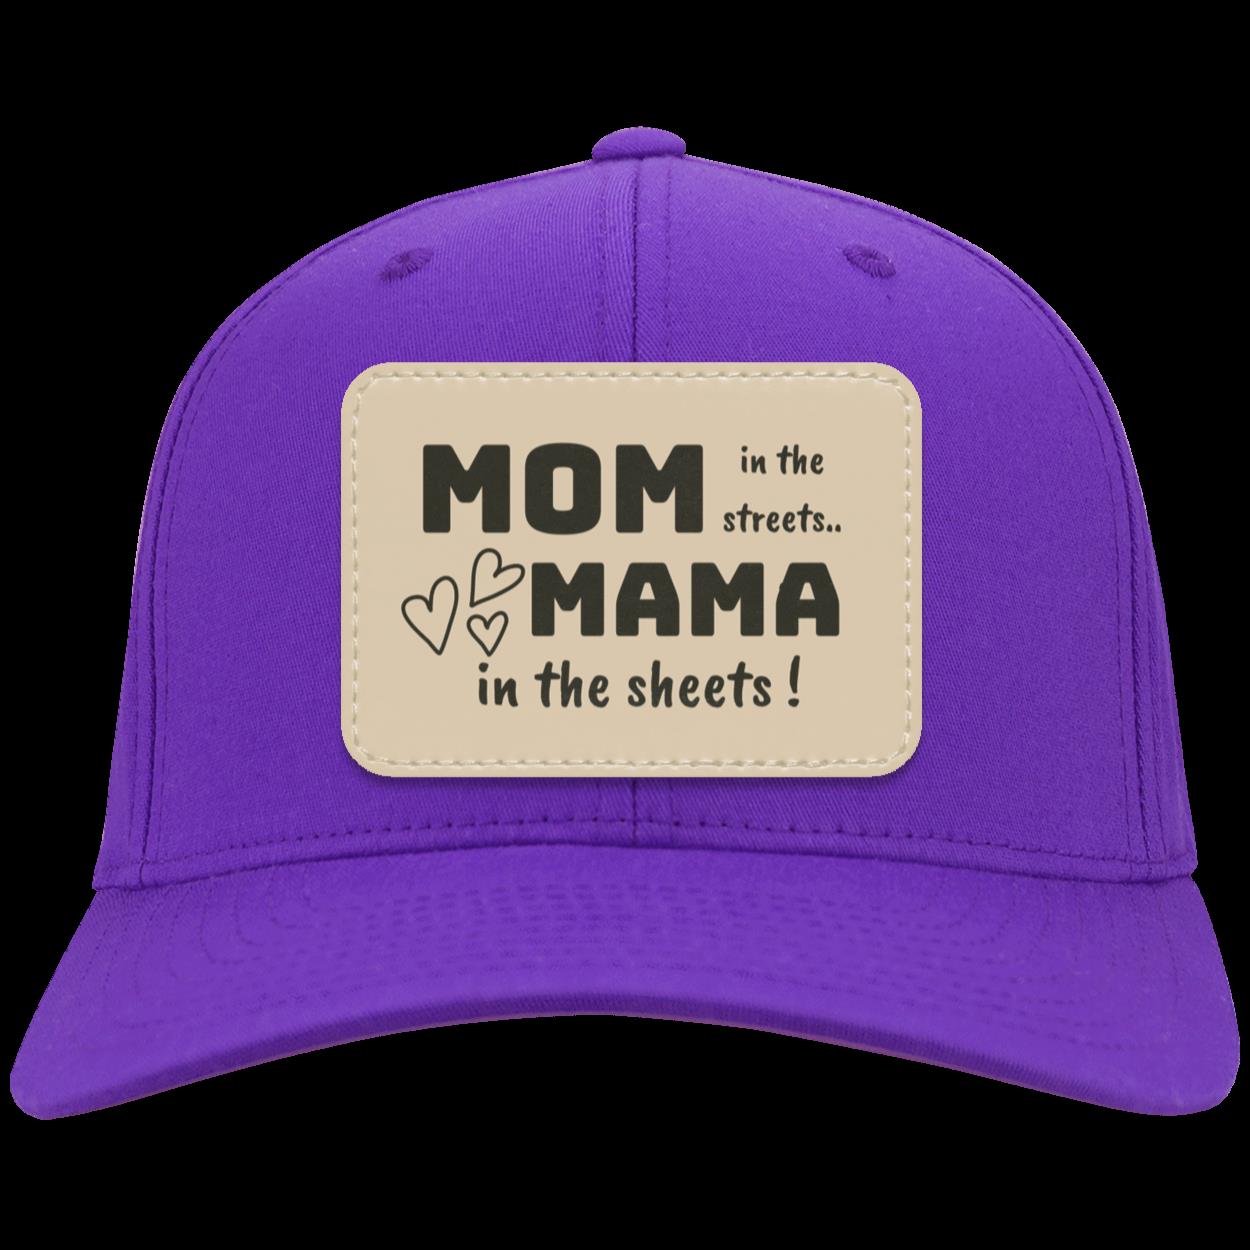 " Mom in the Streets, Mama in the sheets"" Twill Snap-Back Cap